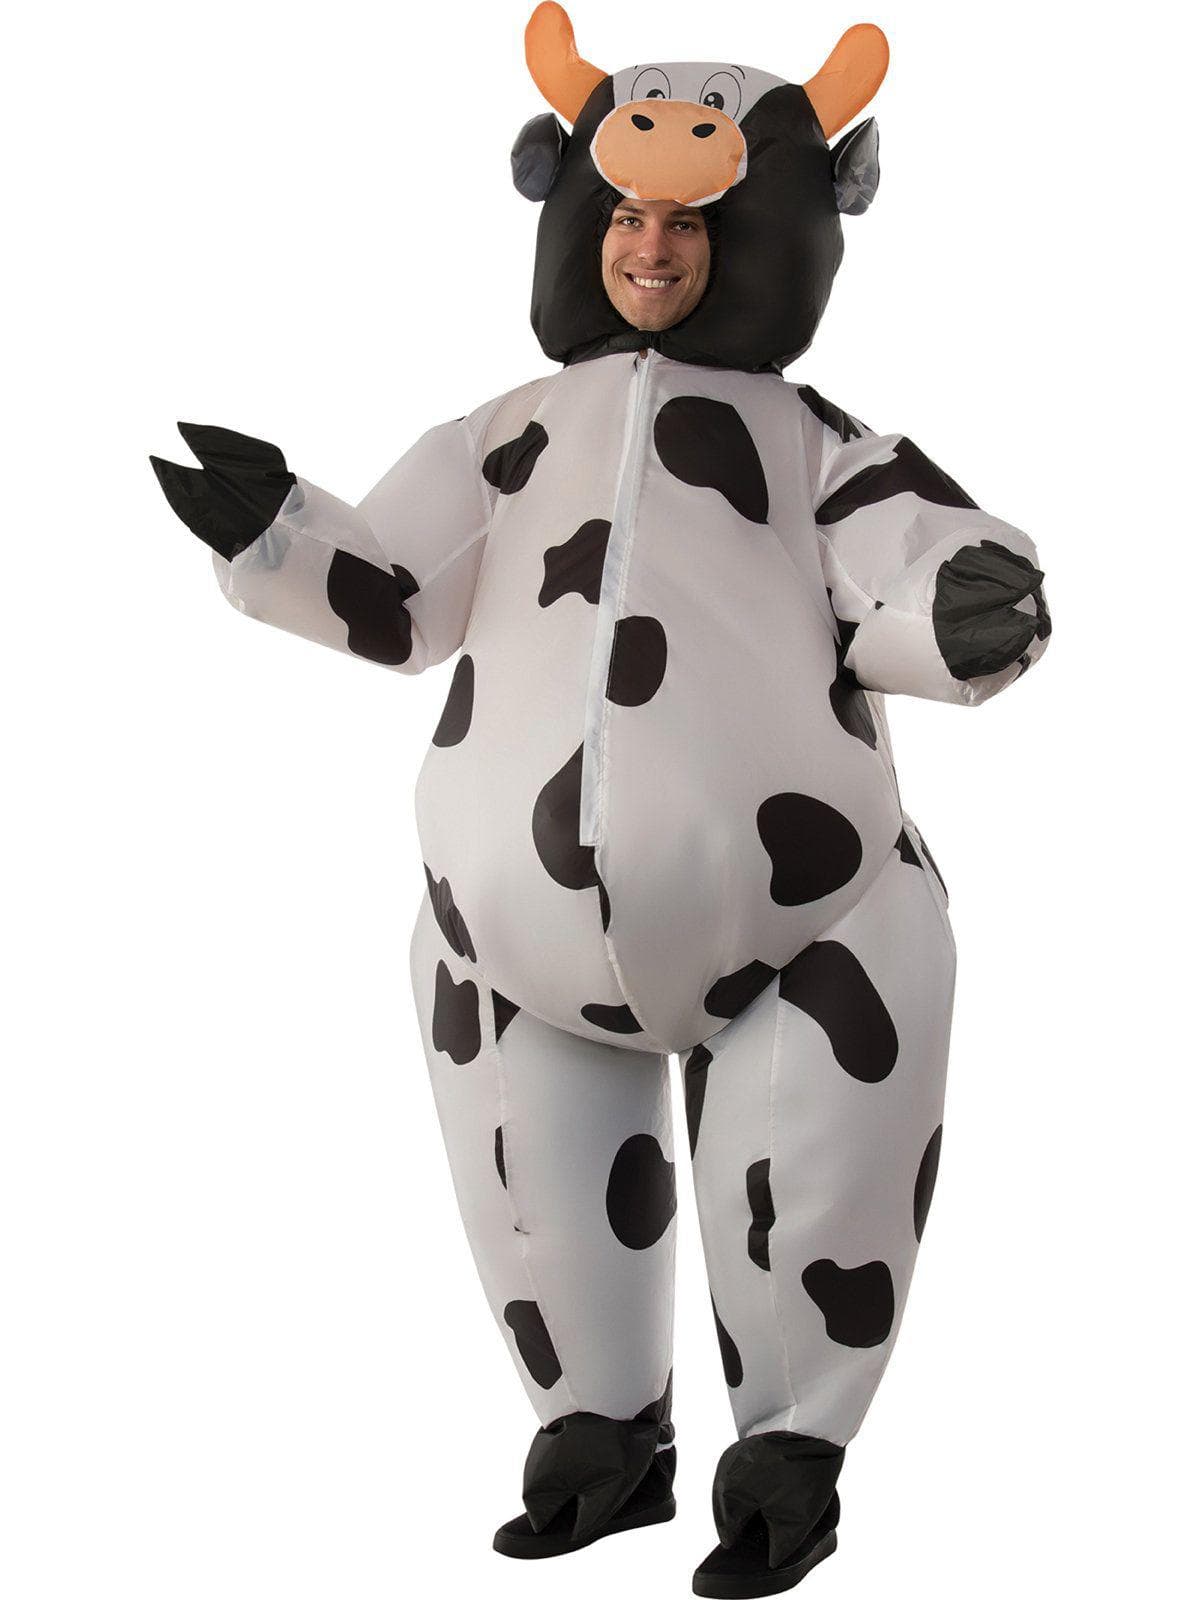 Adult Black and White Inflatable Cow Costume - costumes.com